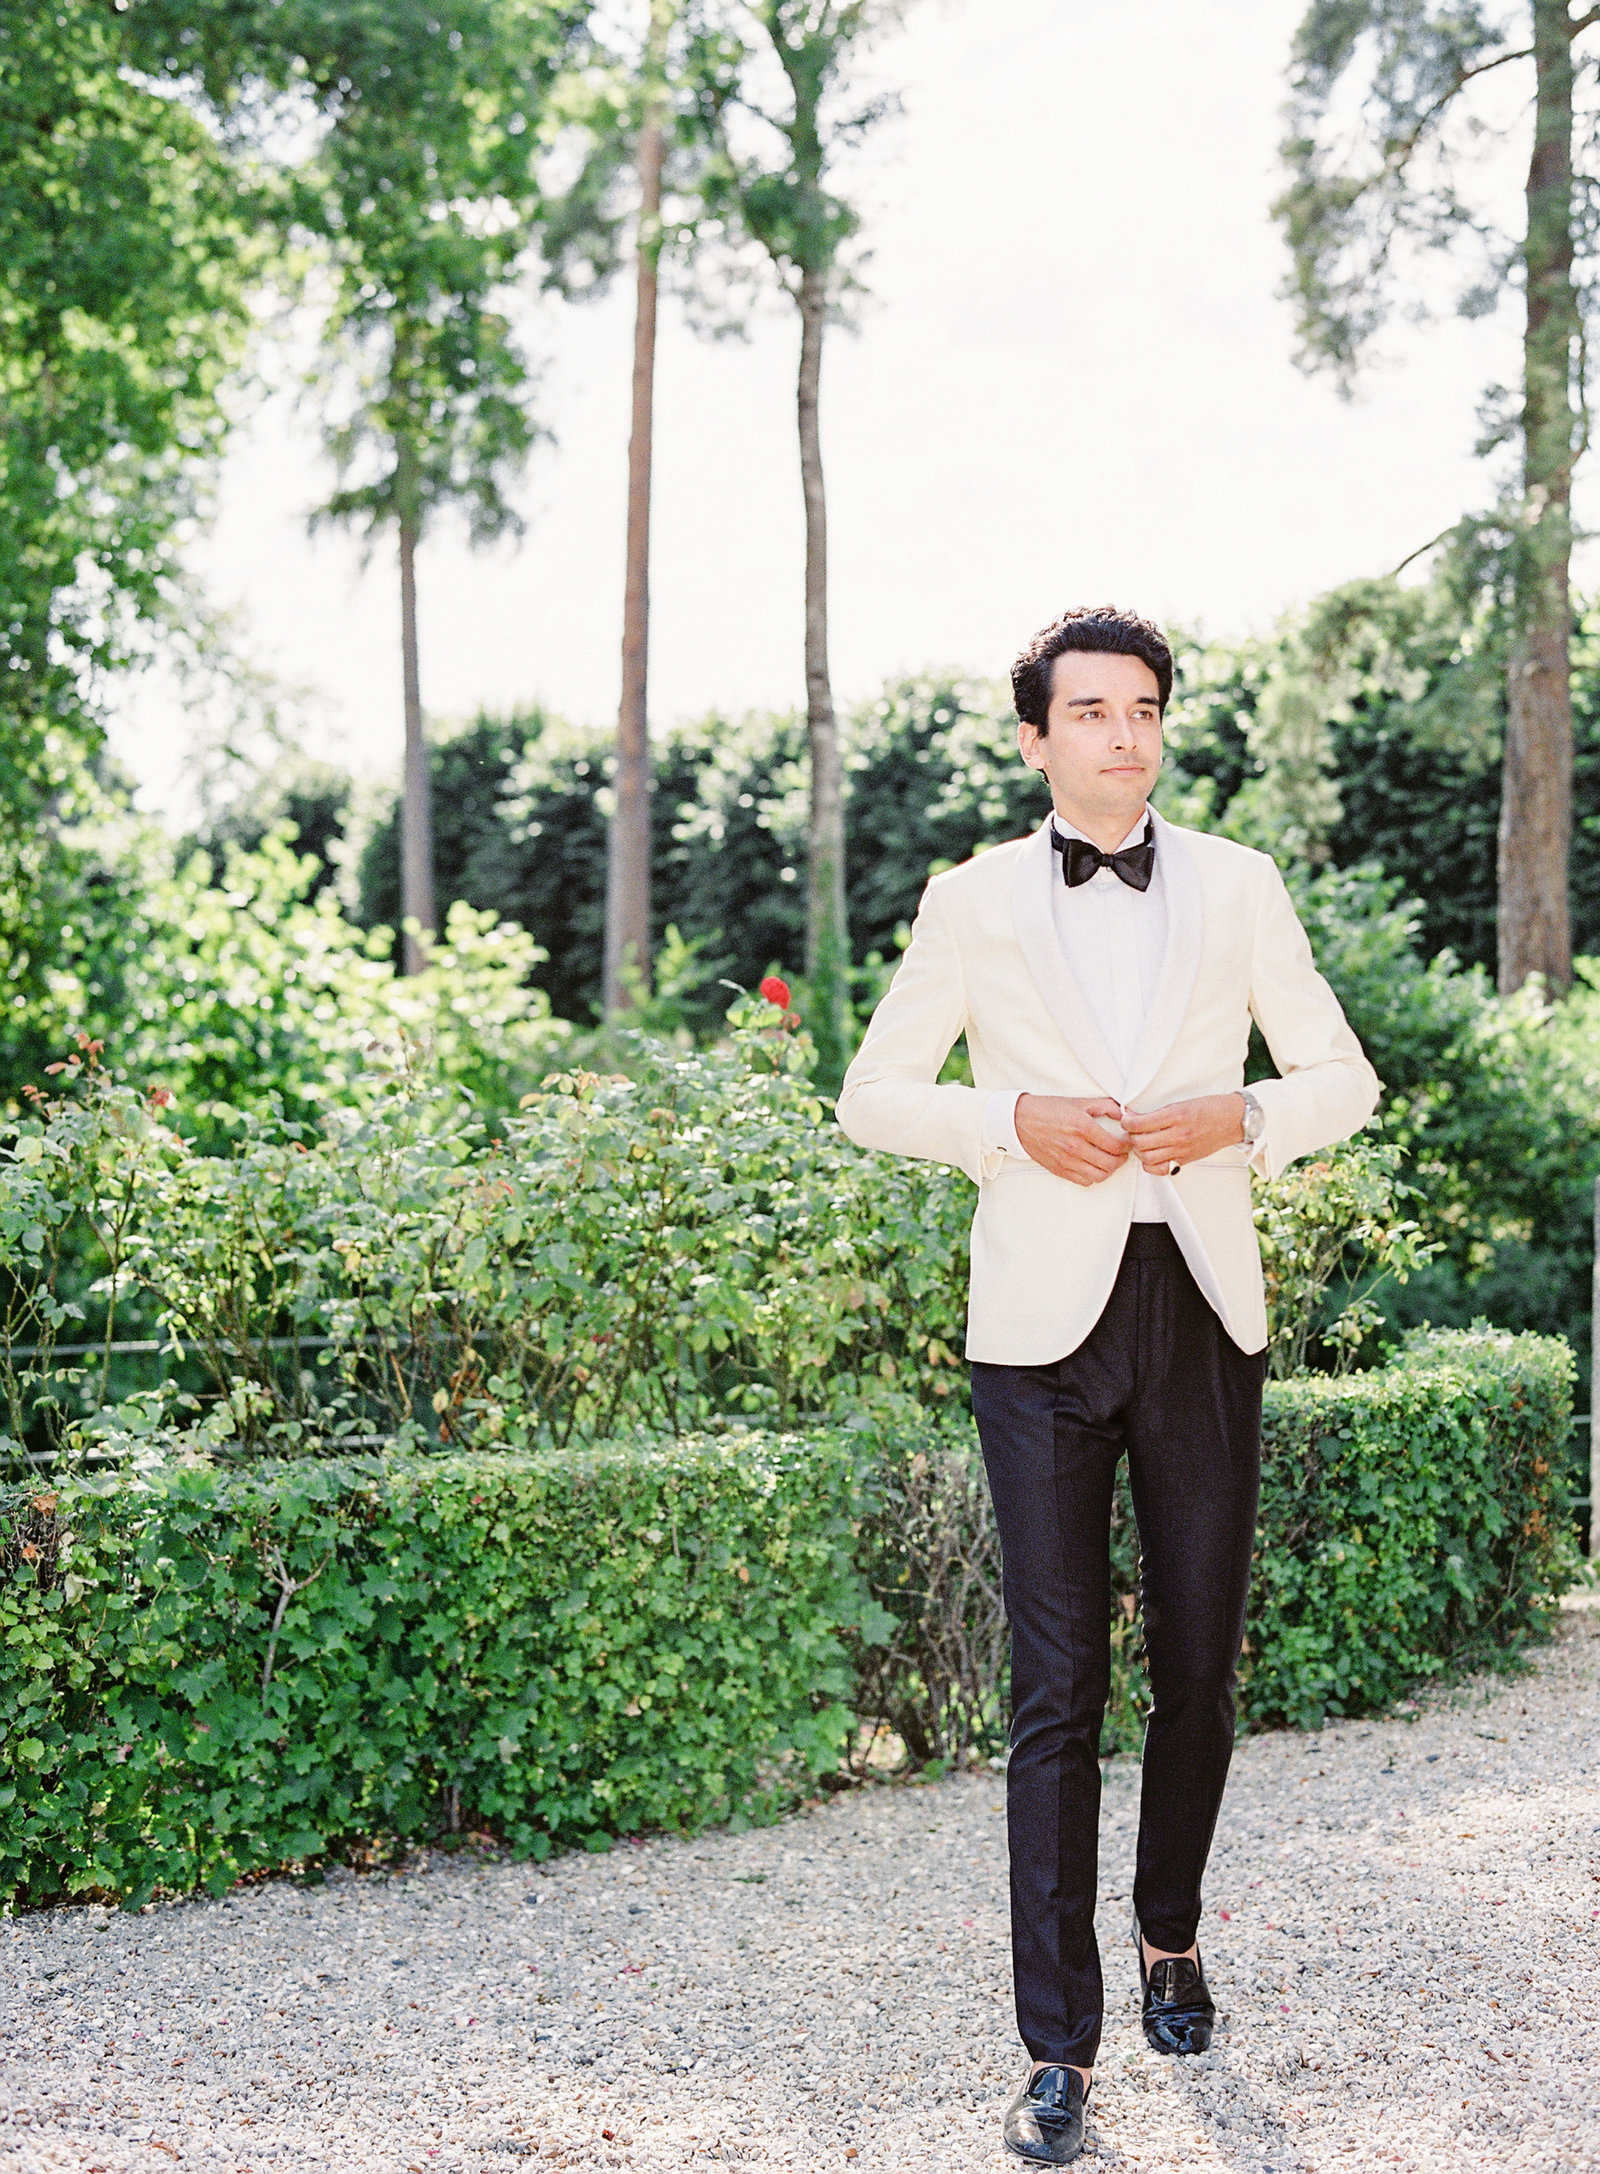 Groom in white dinner jacket walking. Photographed by Amy Mulder Photography